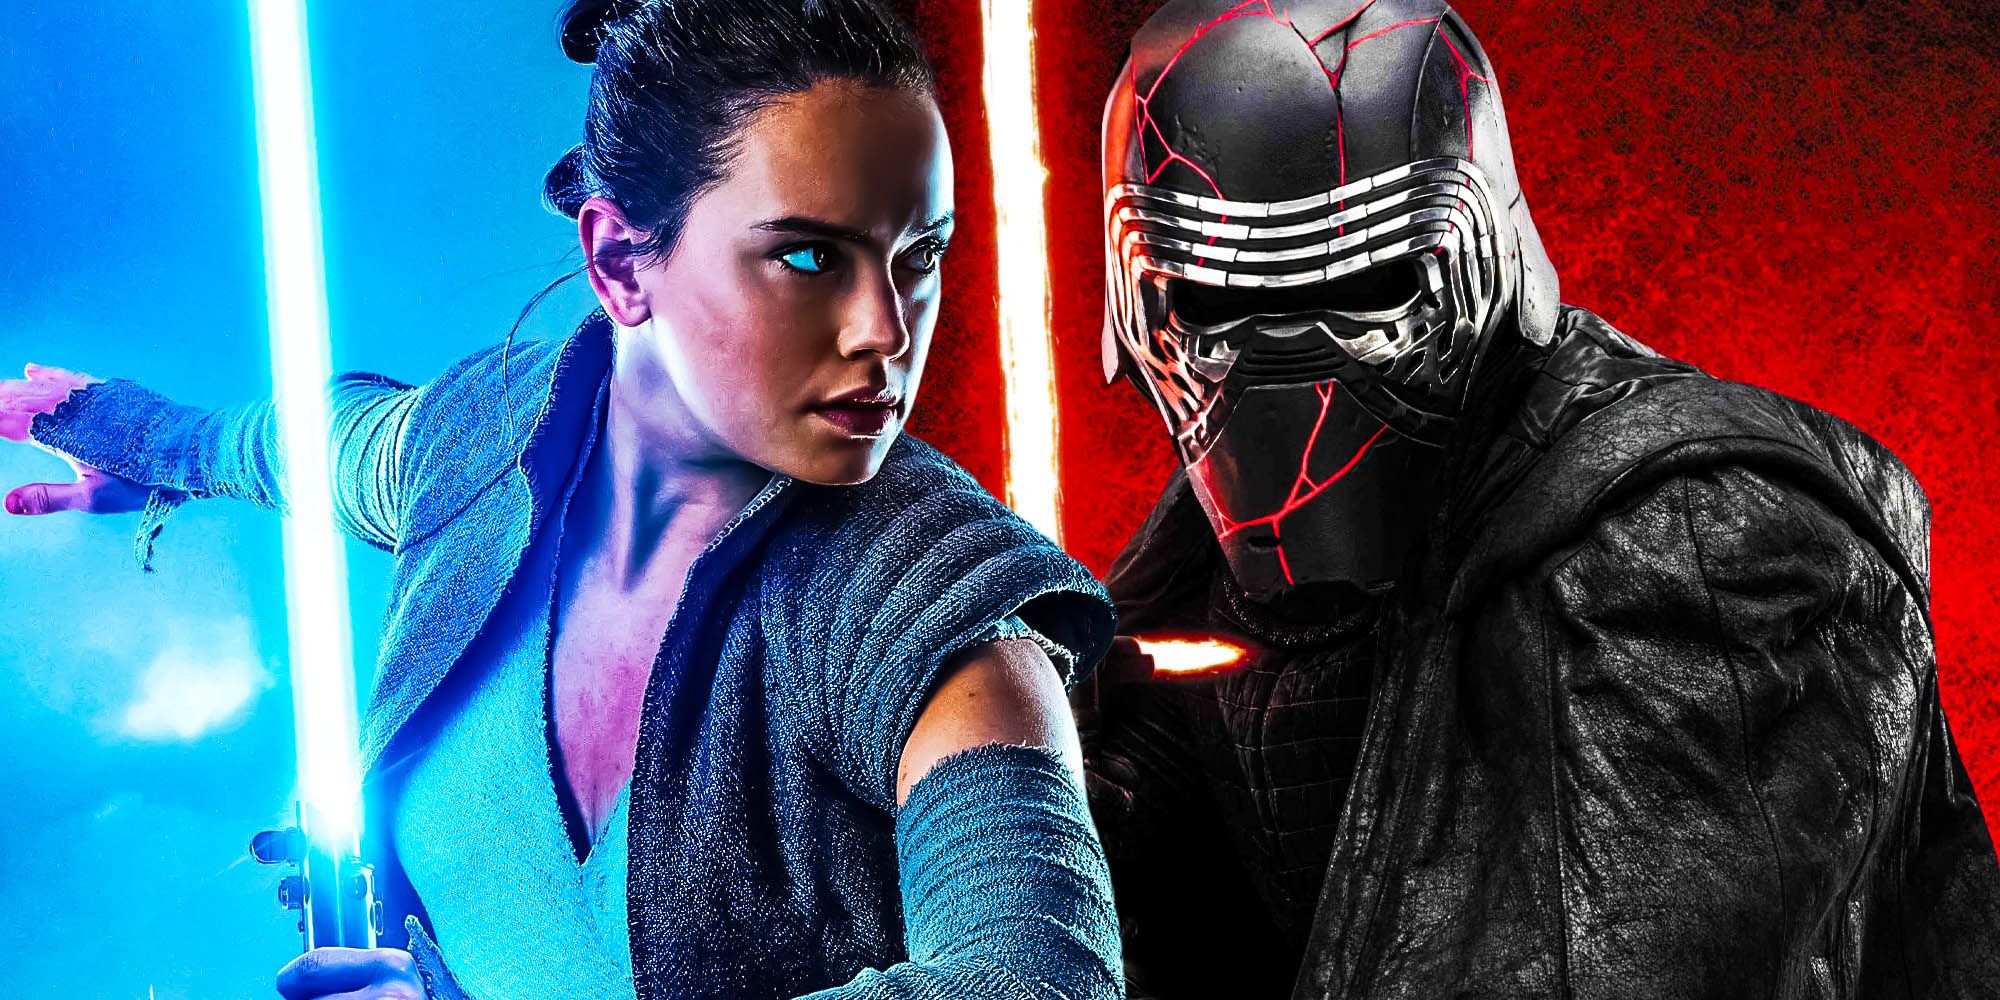 Star wars Rey and kylo greatest force power sequels ignored